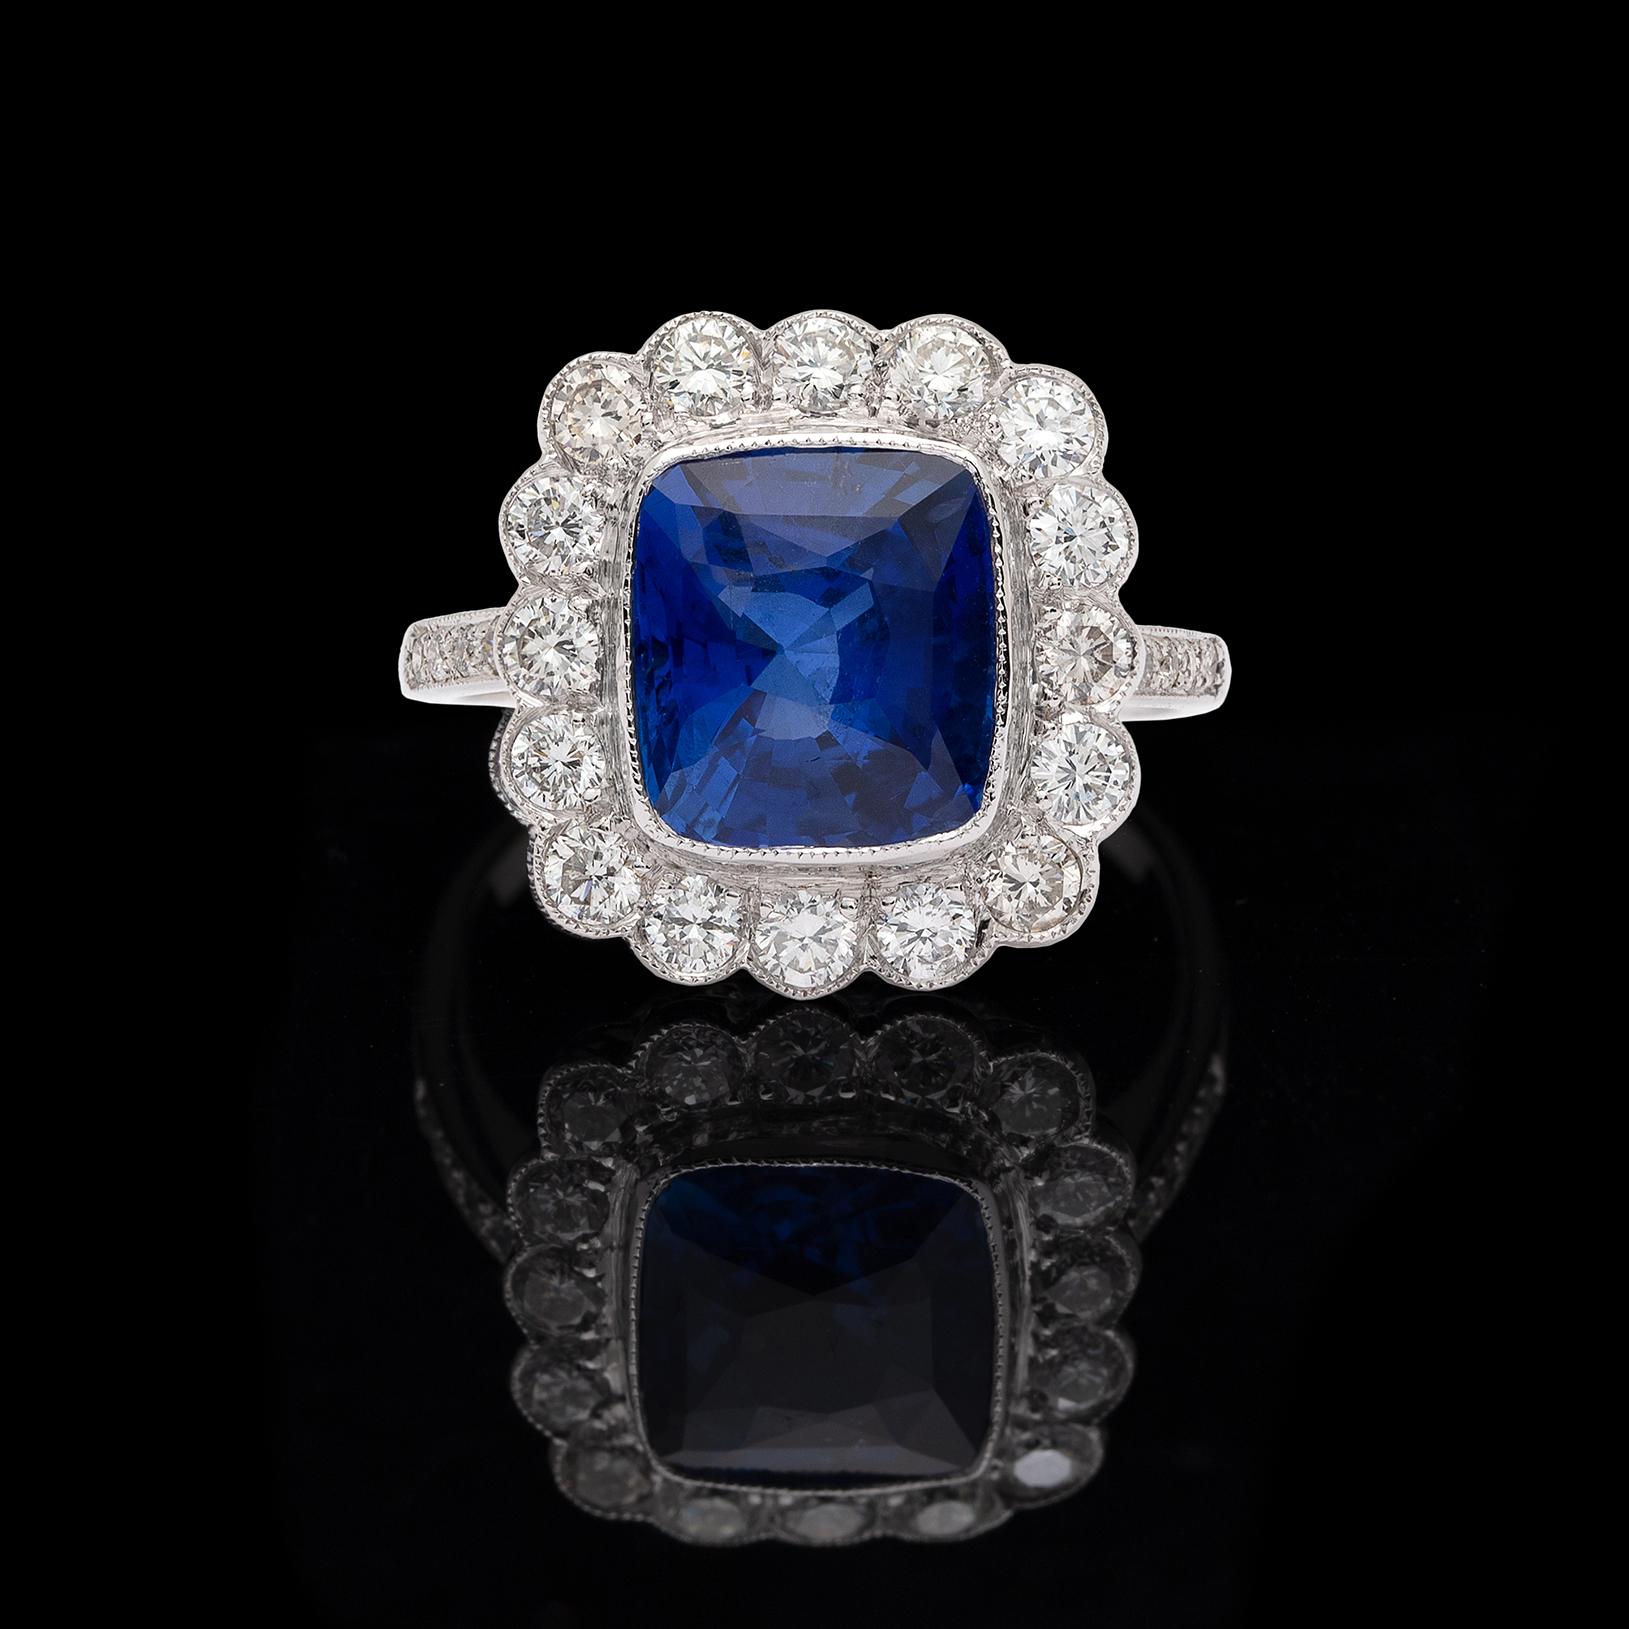 A twist on the Princess Diana design, this elegant 18k white gold ring features a 4.64-cts. cushion-cut Ceylon sapphire, bright blue and full of life, surround by 16 round brilliant-cut diamonds and with diamond-set shoulders, in total weighing